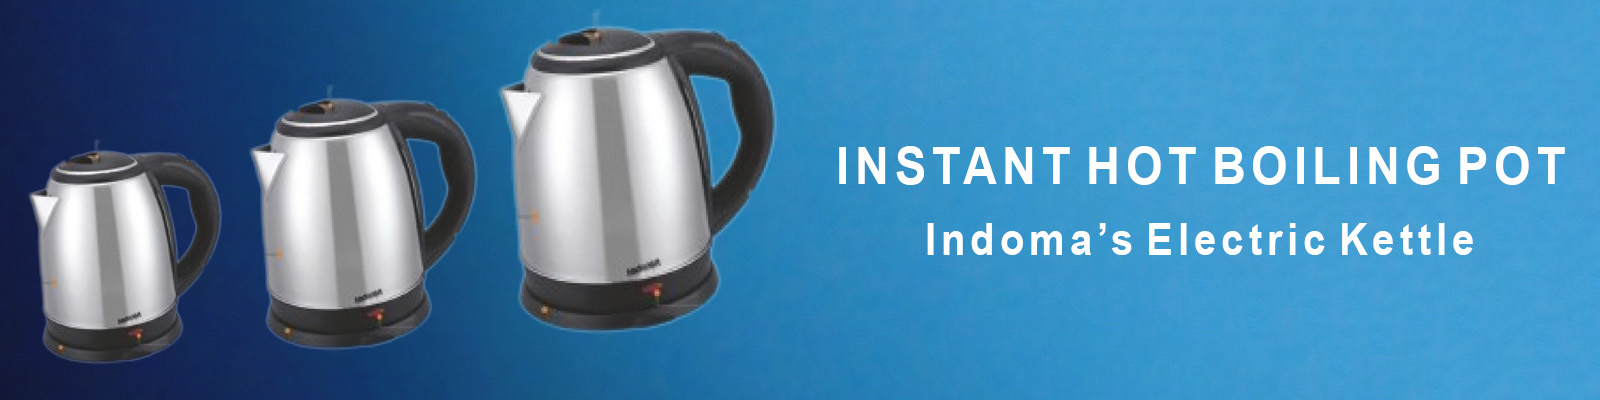 Indoma Electric Kettle banner